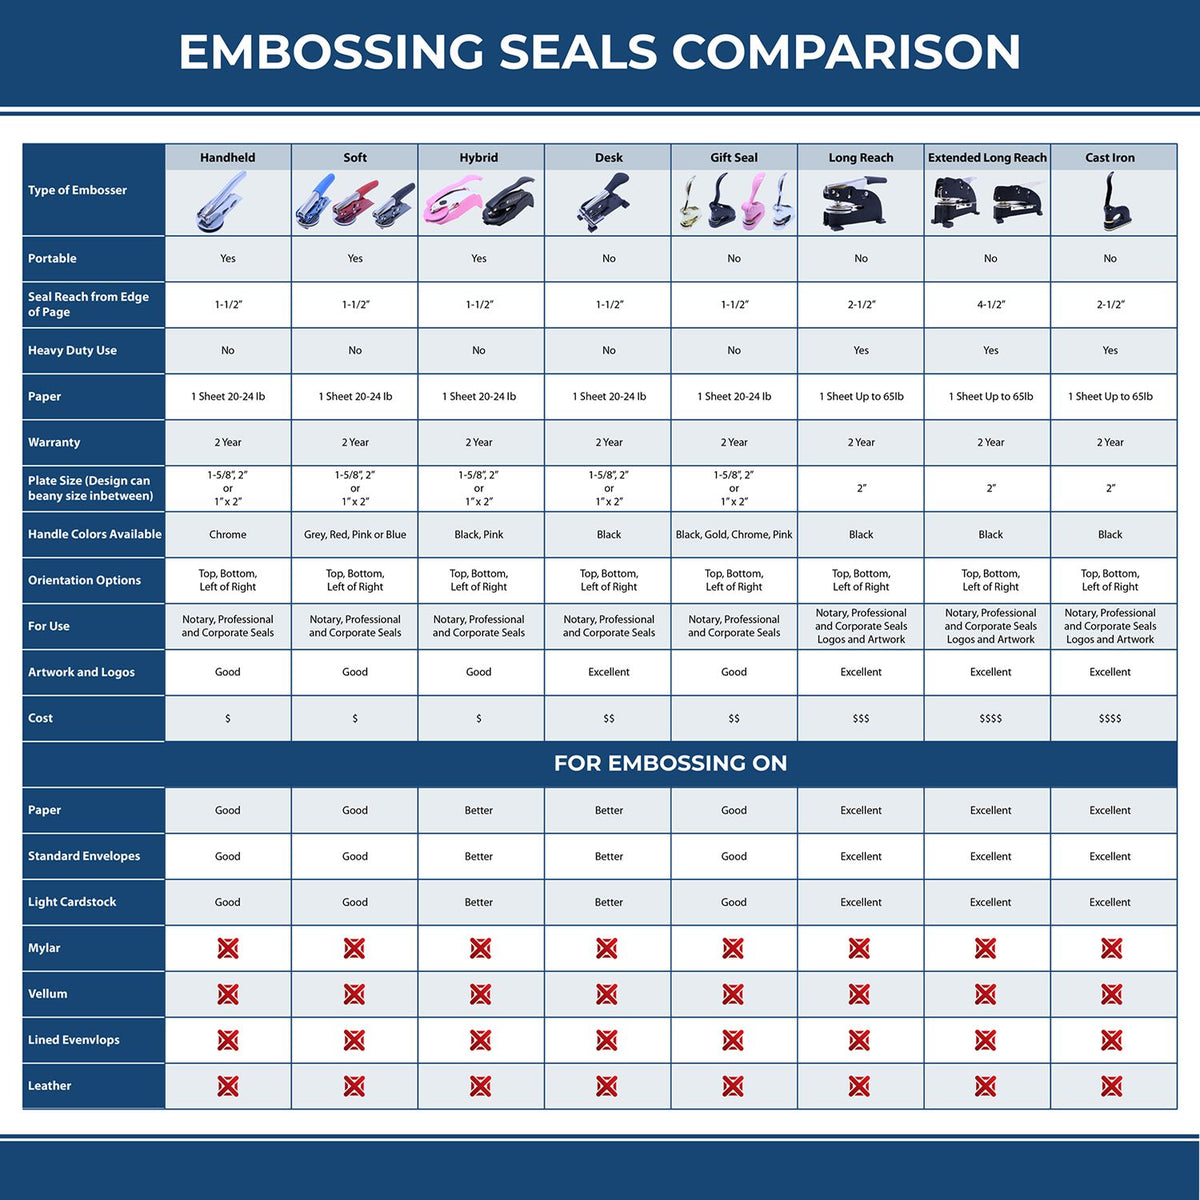 A comparison chart for the different types of mount models available for the Guam Engineer Desk Seal.